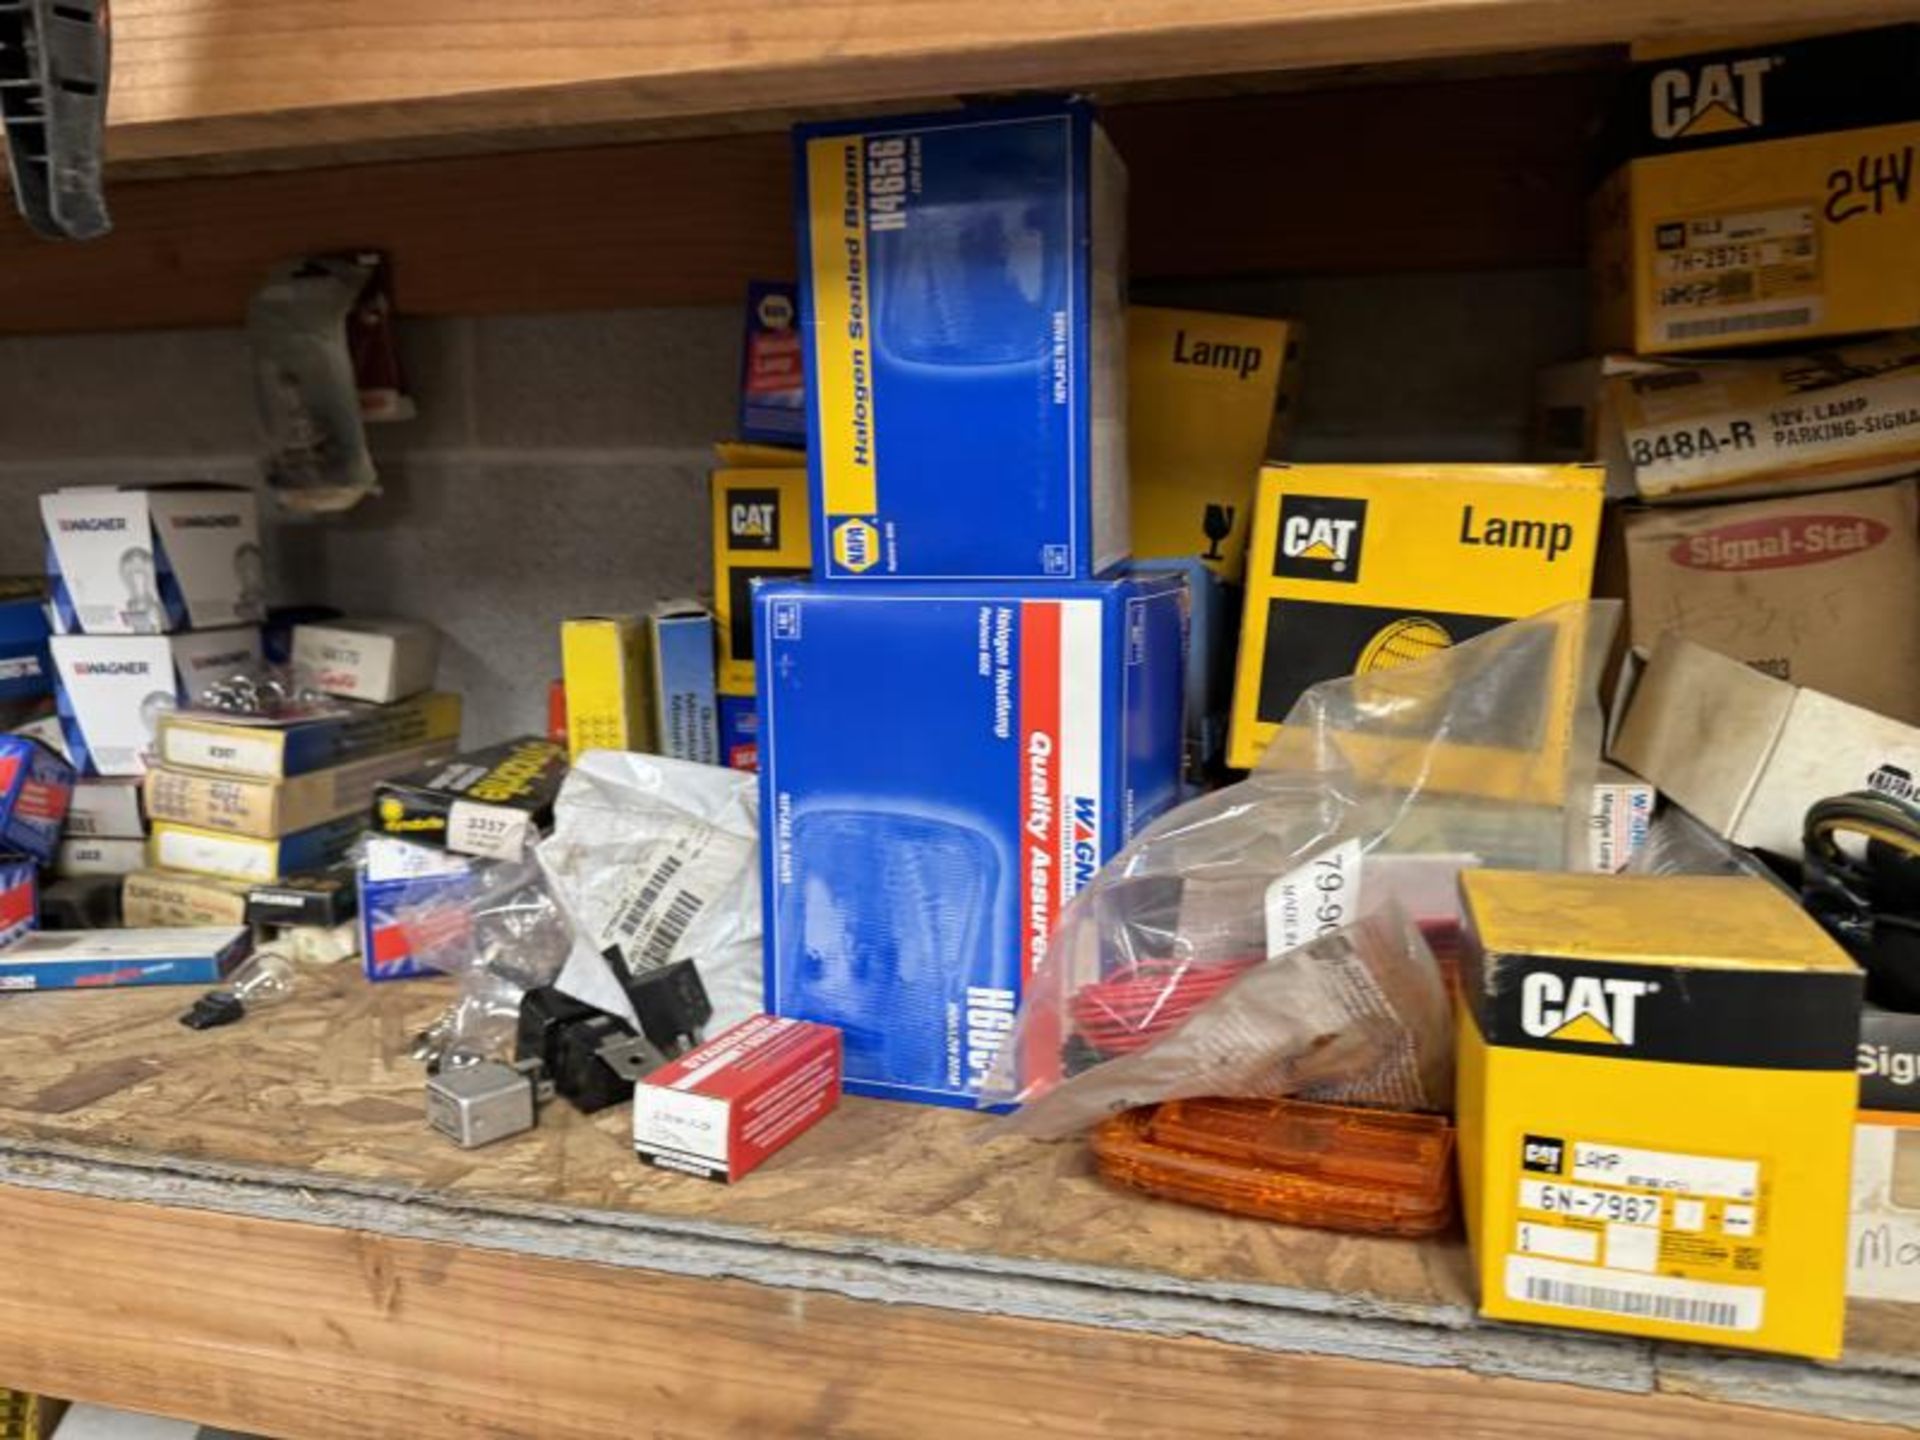 Contents of Shelving Unit (NOT SHELF) Including: Spray Paint, Concrete Adhesive, Vehicles Fuses, Veh - Image 8 of 11